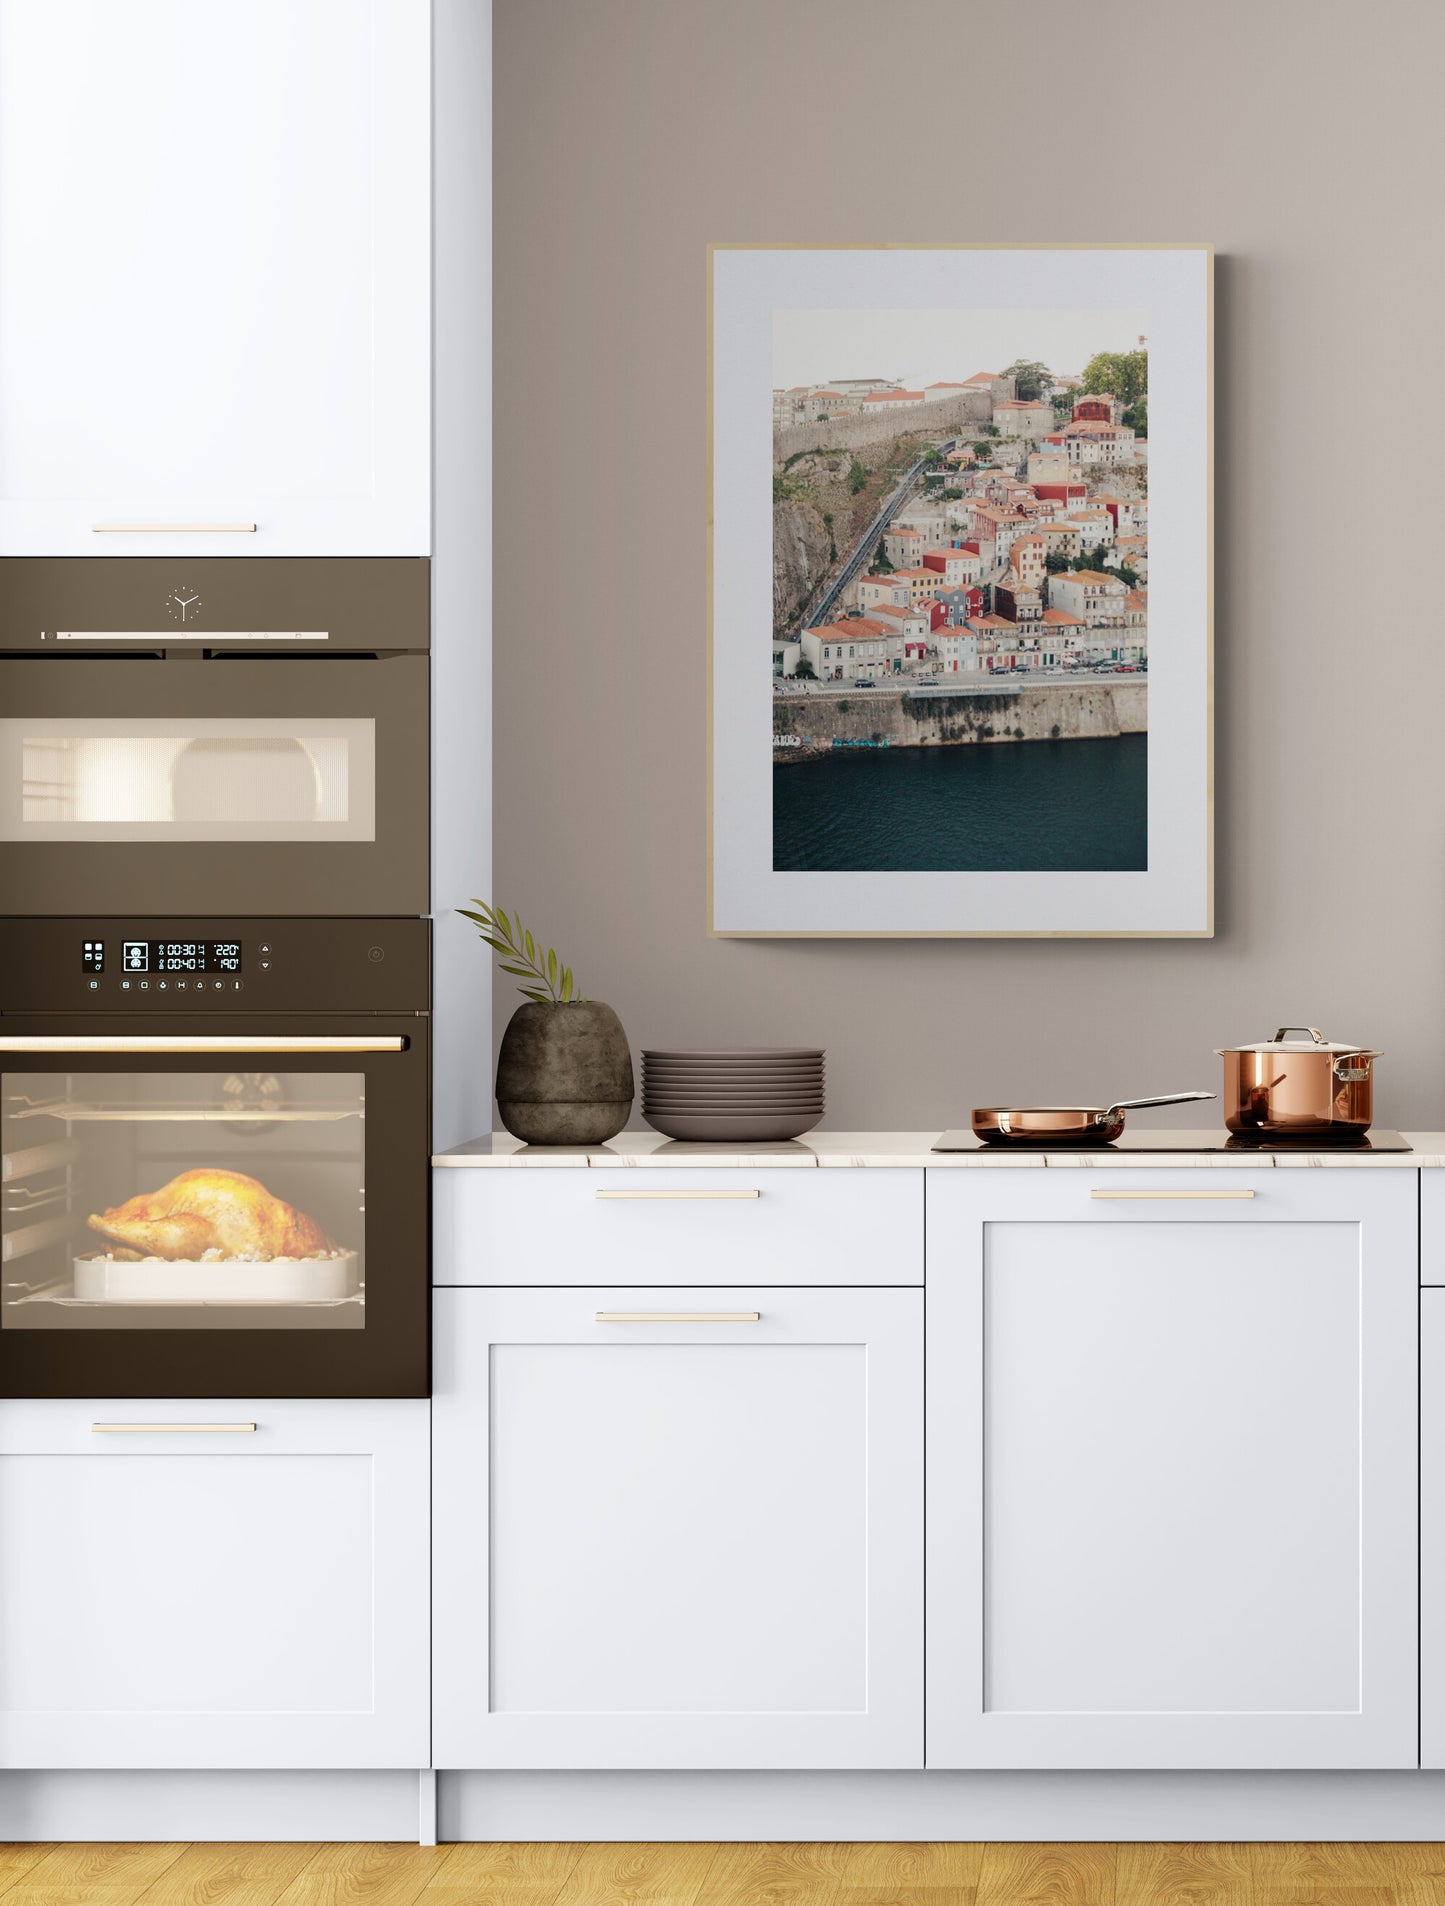 Photograph of Ribeira neighborhood in Porto Portugal in a kitchen as wall art